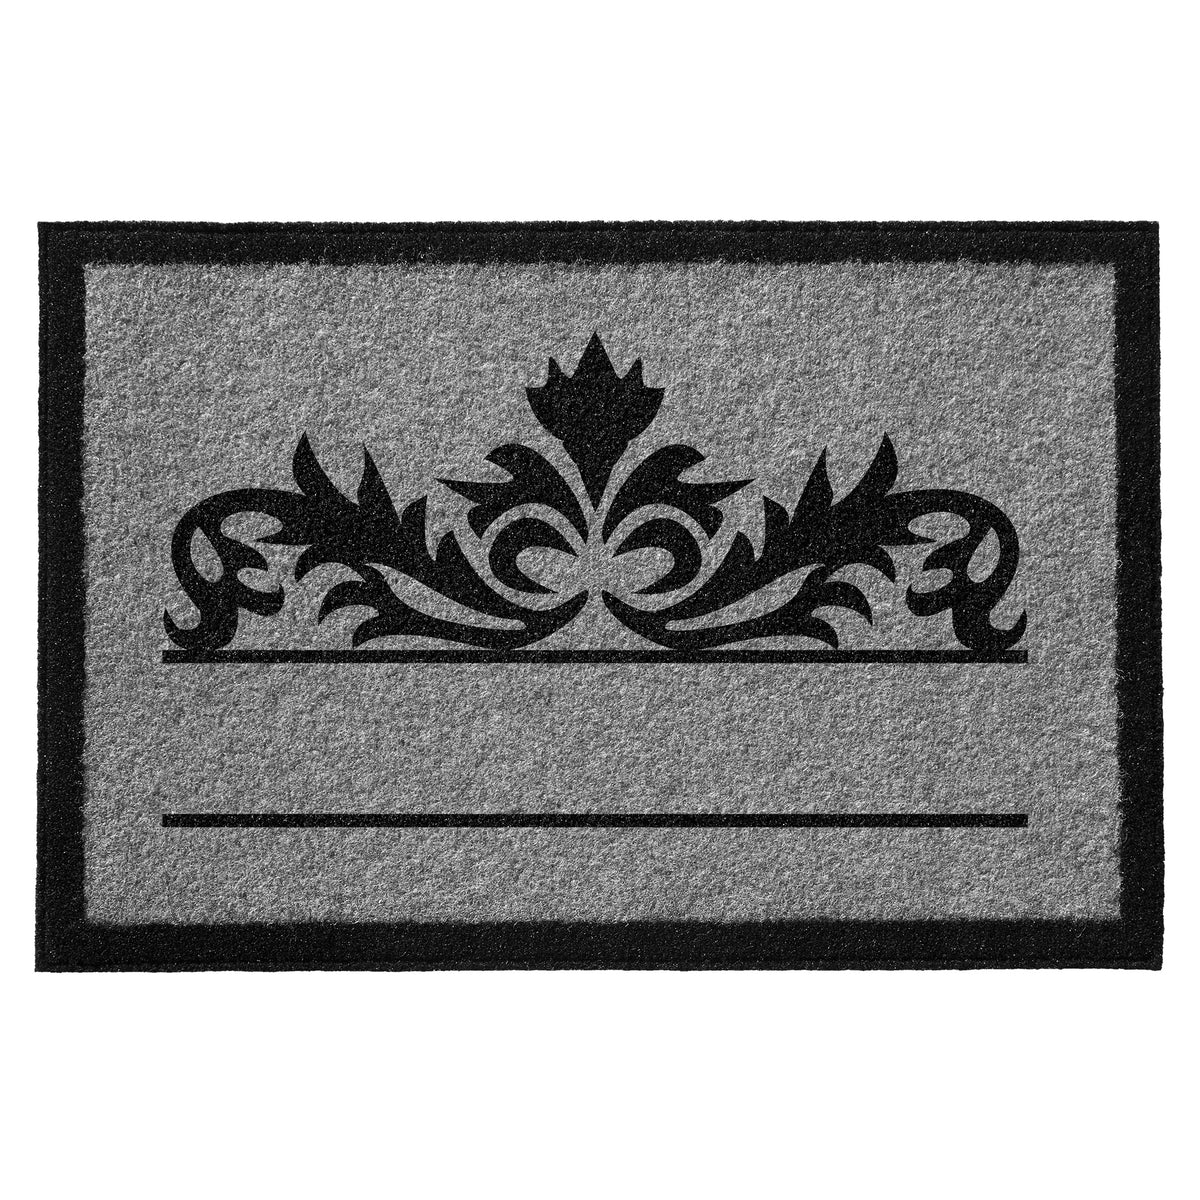 Infinity Custom Mats™ All-Weather Personalized Door Mat - STYLE: MURPHY COLOR: GREY / BLACK - rugsthatfit.com